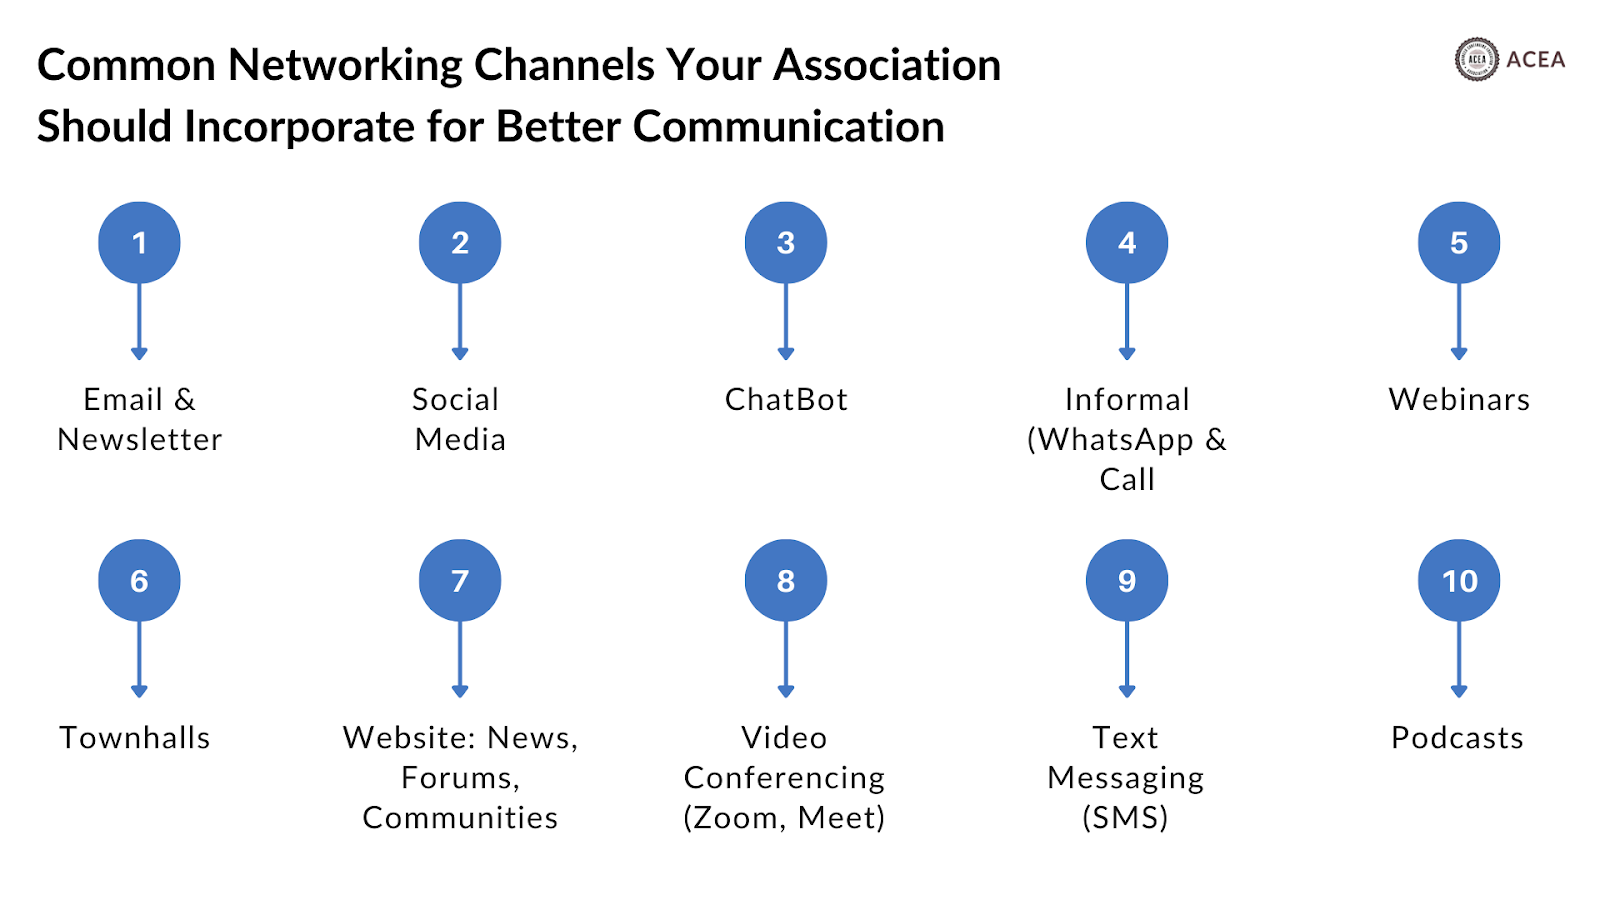 Networking channels associations should incorporate